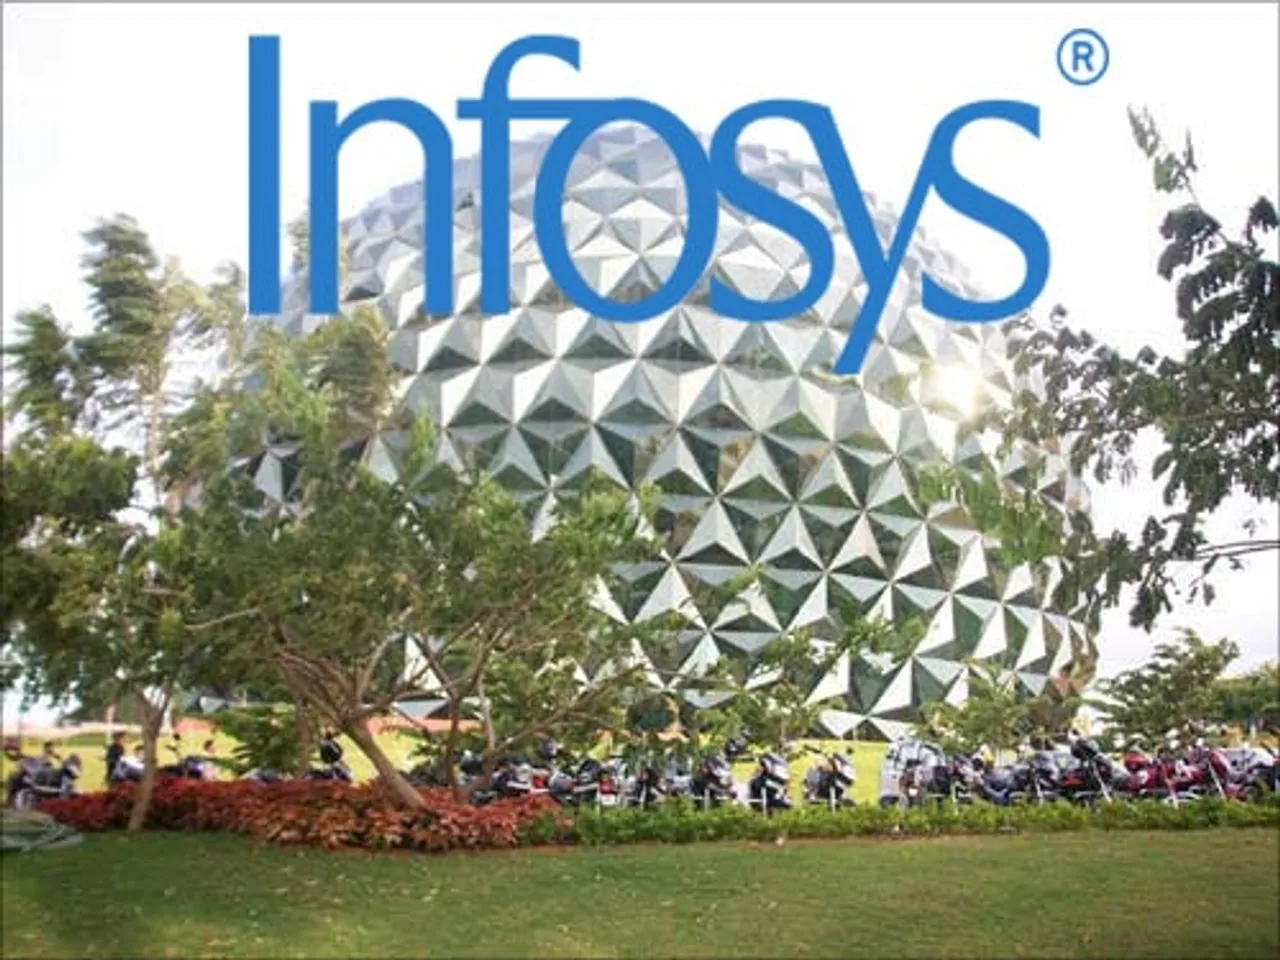 Infosys named Leader in NelsonHall’s NEAT report for IoT services